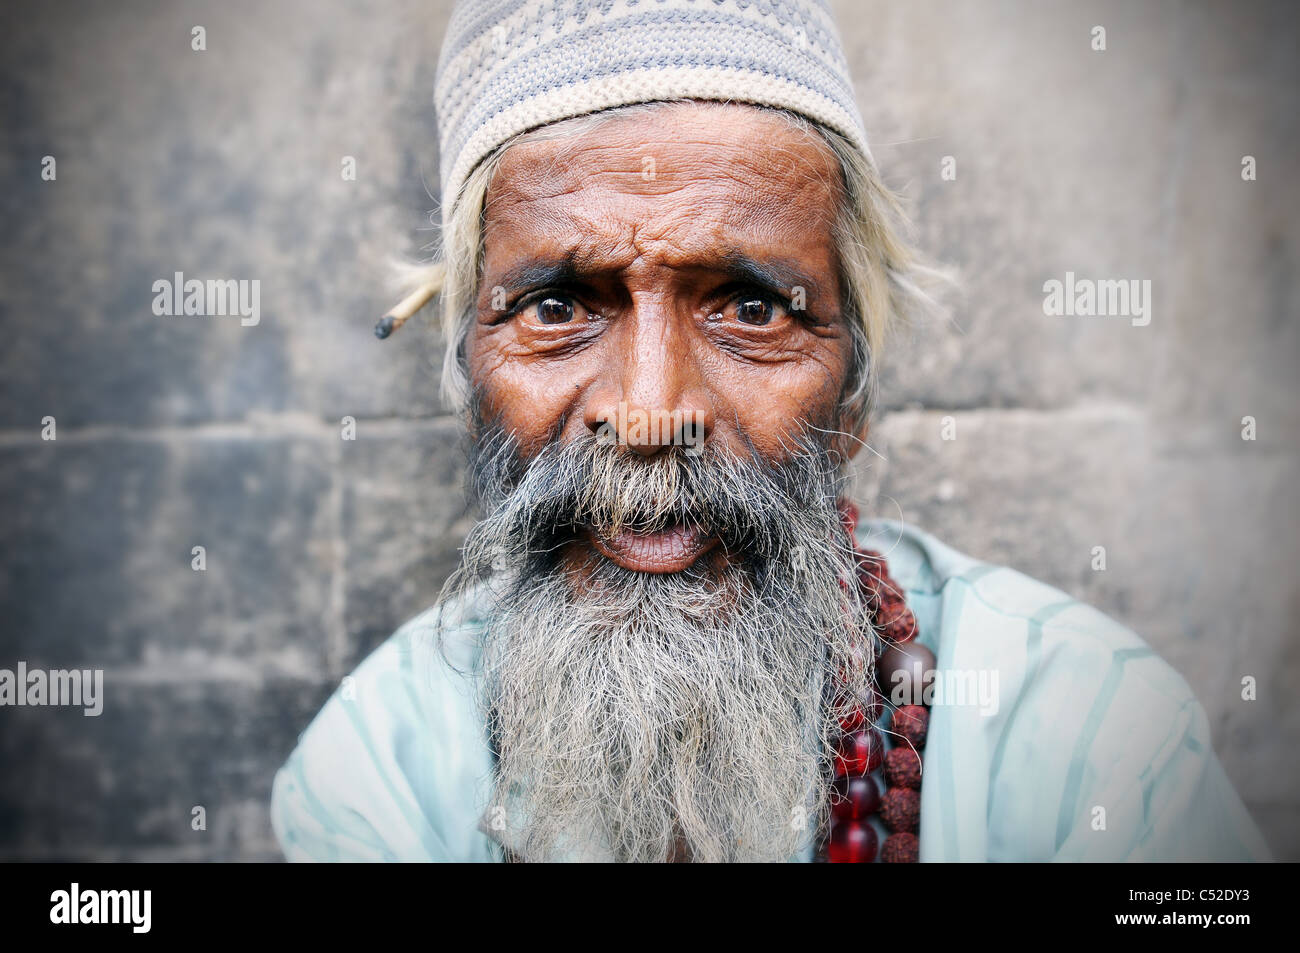 Stock Photo - Sufi Fakirs (Muslim holy man) at the annual Urs (death anniversary) of the Sufi saint Moinuddin Chisti - sufi-fakirs-muslim-holy-man-at-the-annual-urs-death-anniversary-of-C52DY3